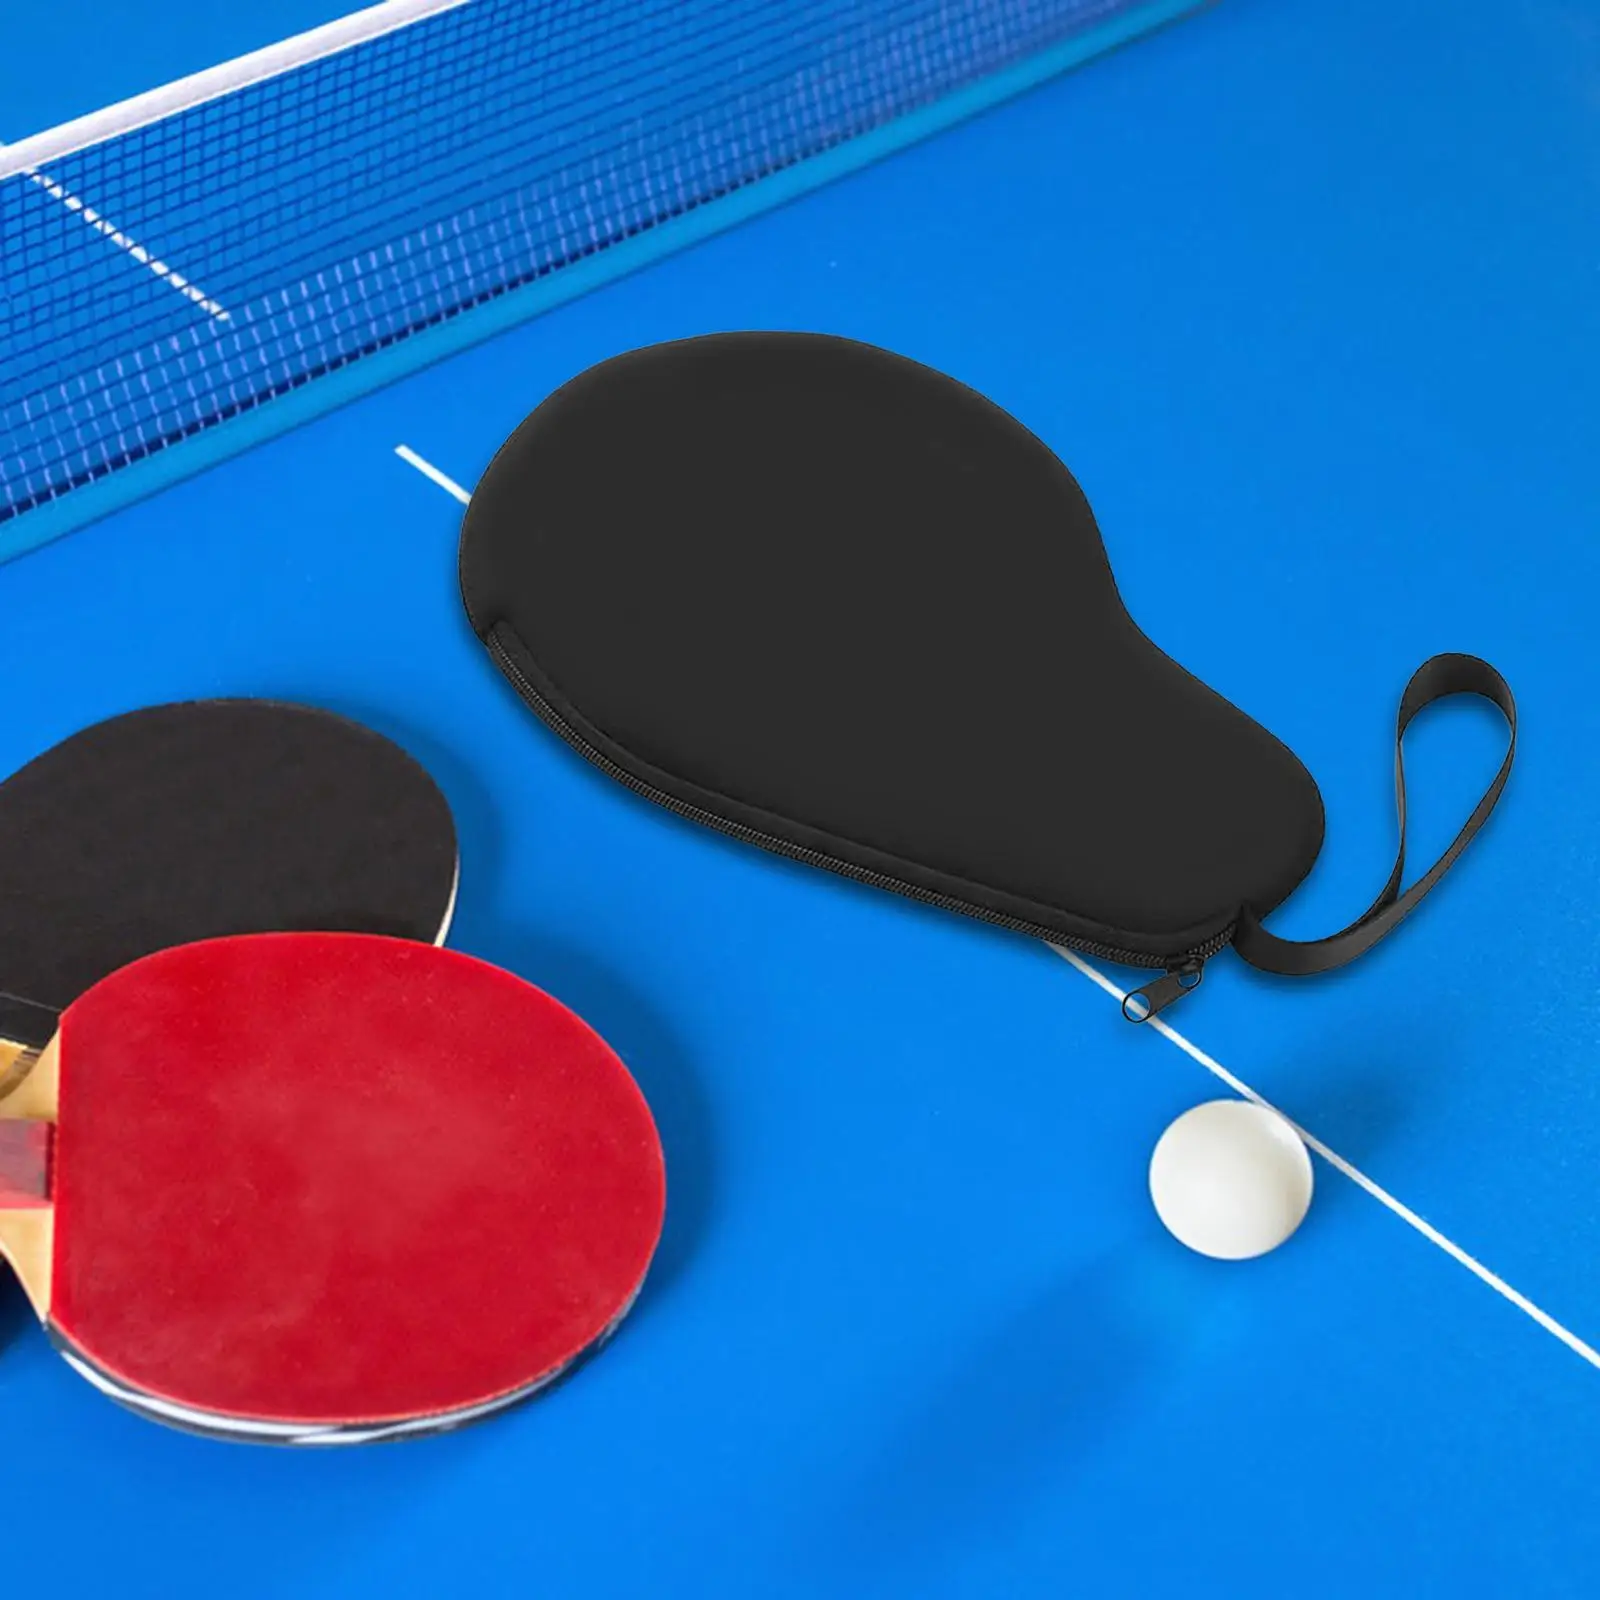 Ping Pong Paddle Case Wear Resistant Container Ping Pong Paddle Cover Table Tennis Cover for Sportsman Unisex Youth Training Gym